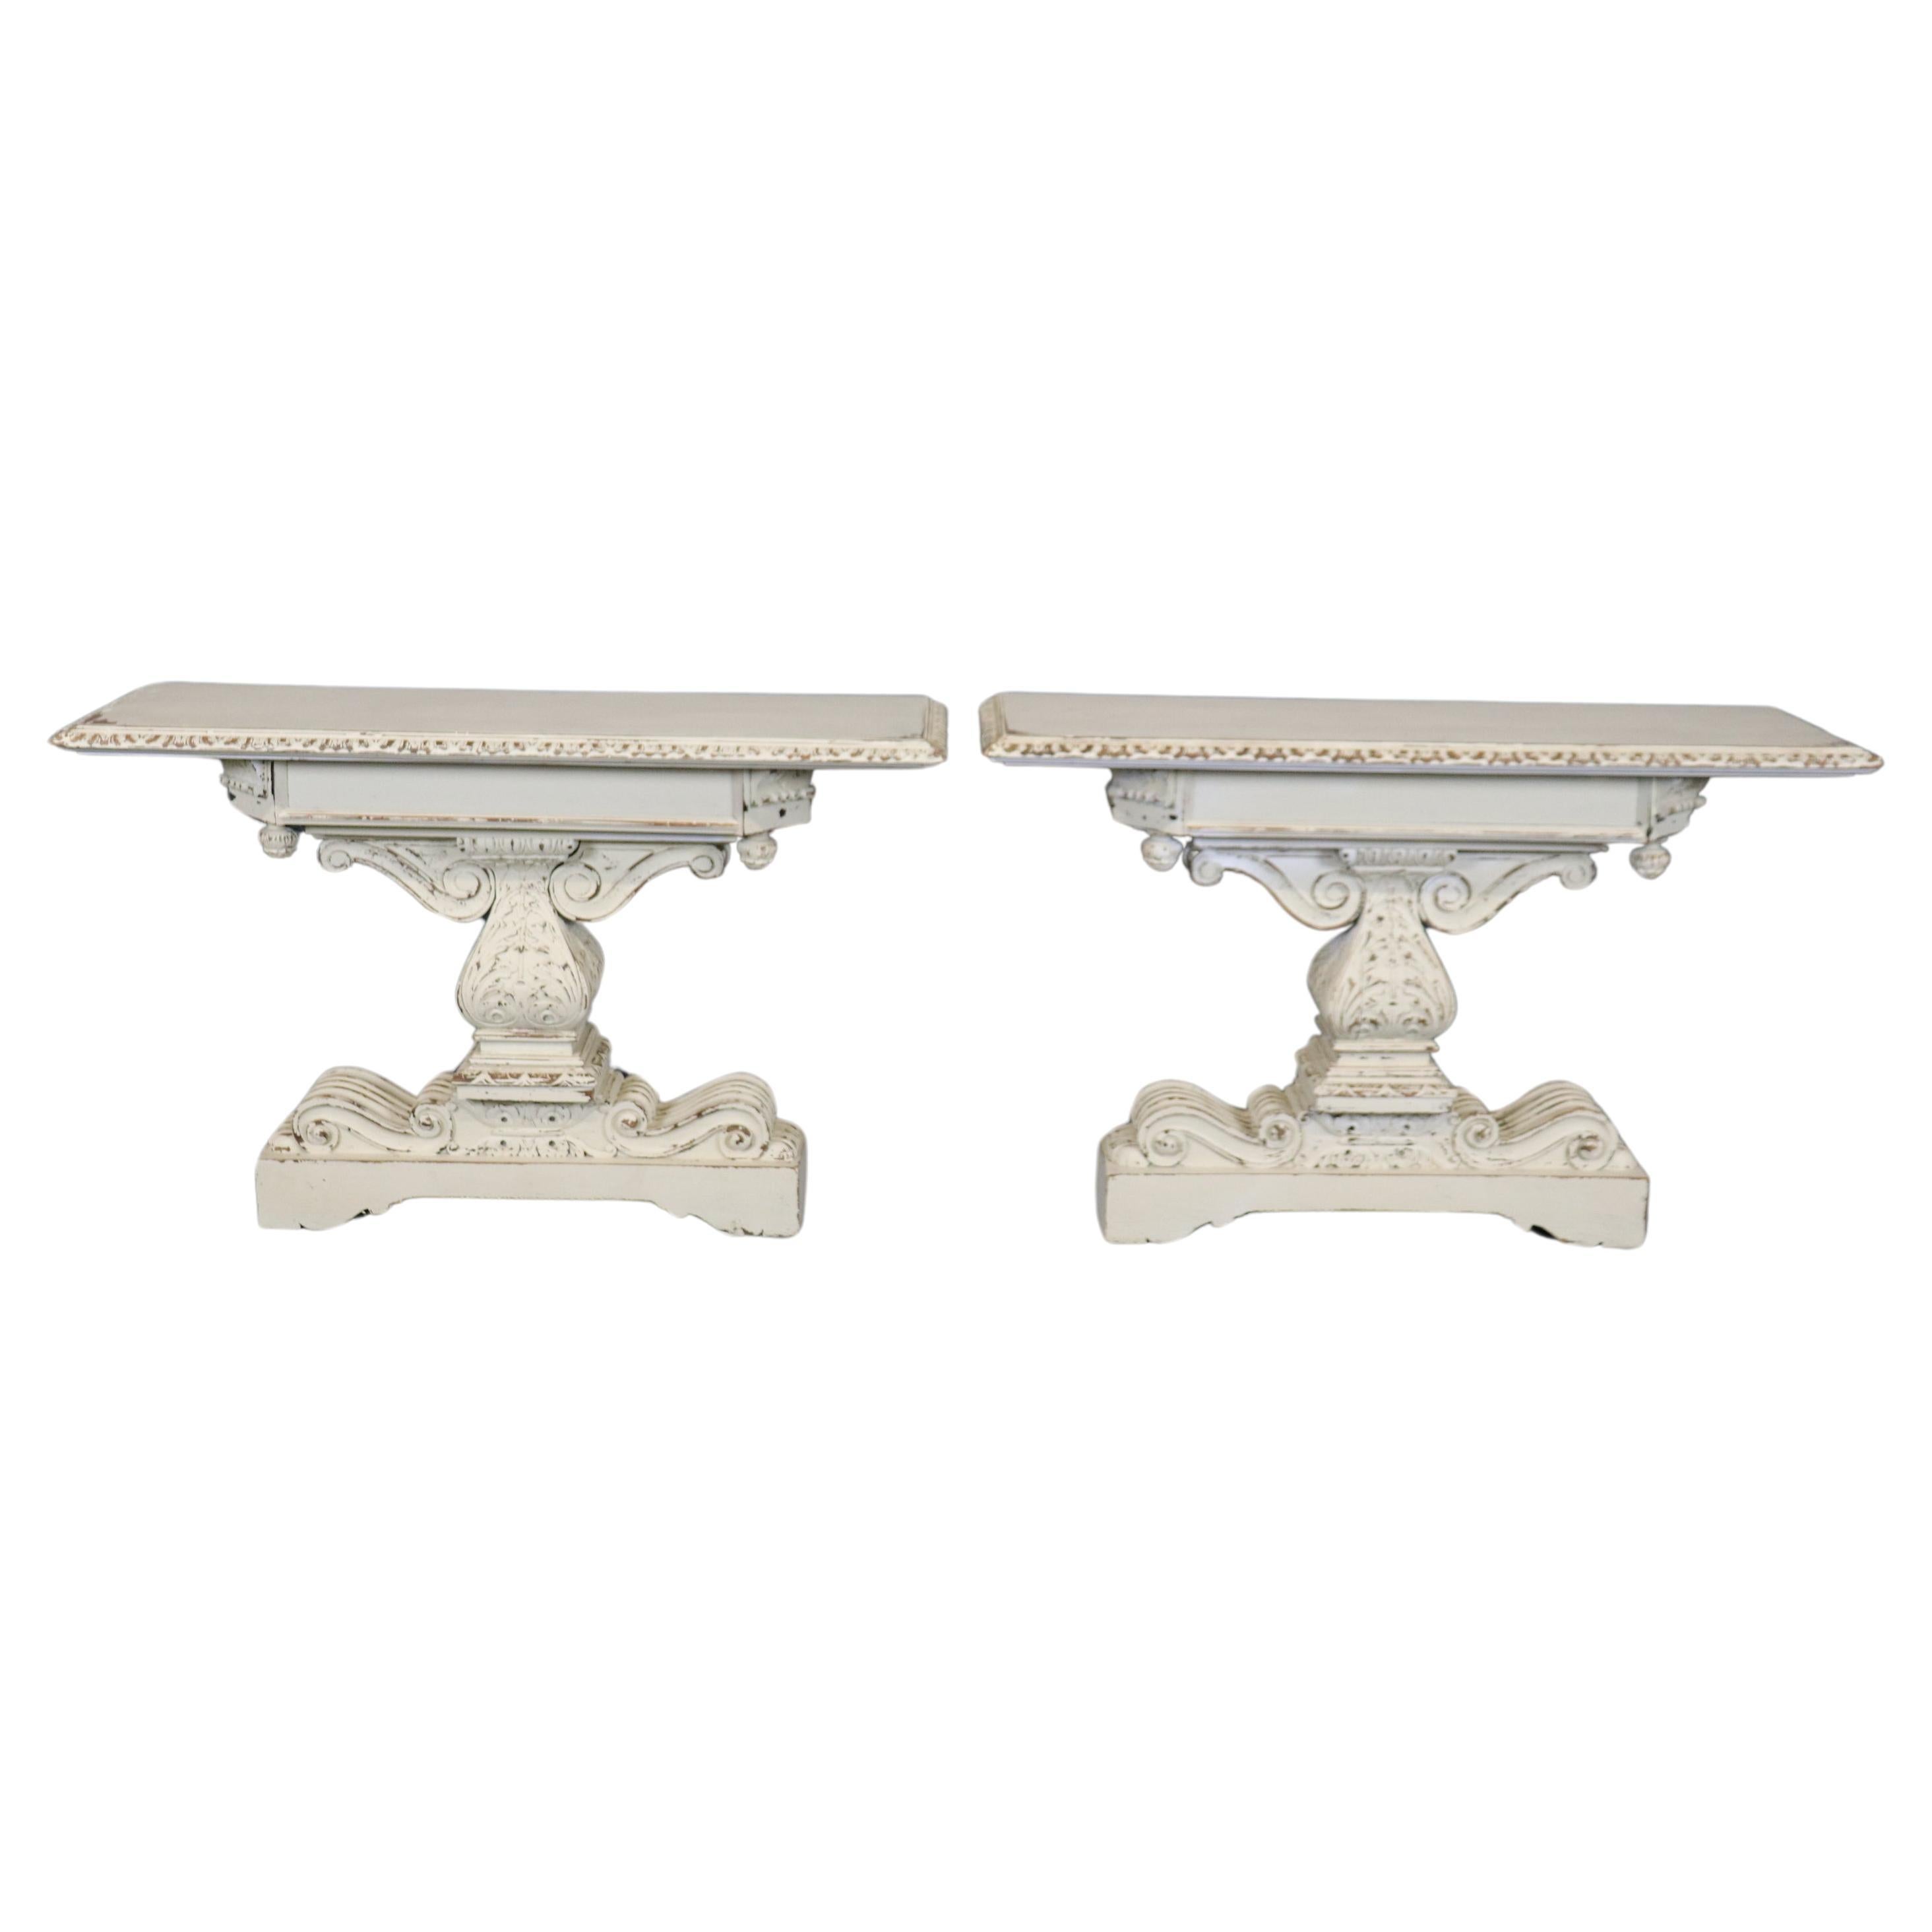  Pair of Distressed White Painted Carved Jacobean Style Console Tables  For Sale